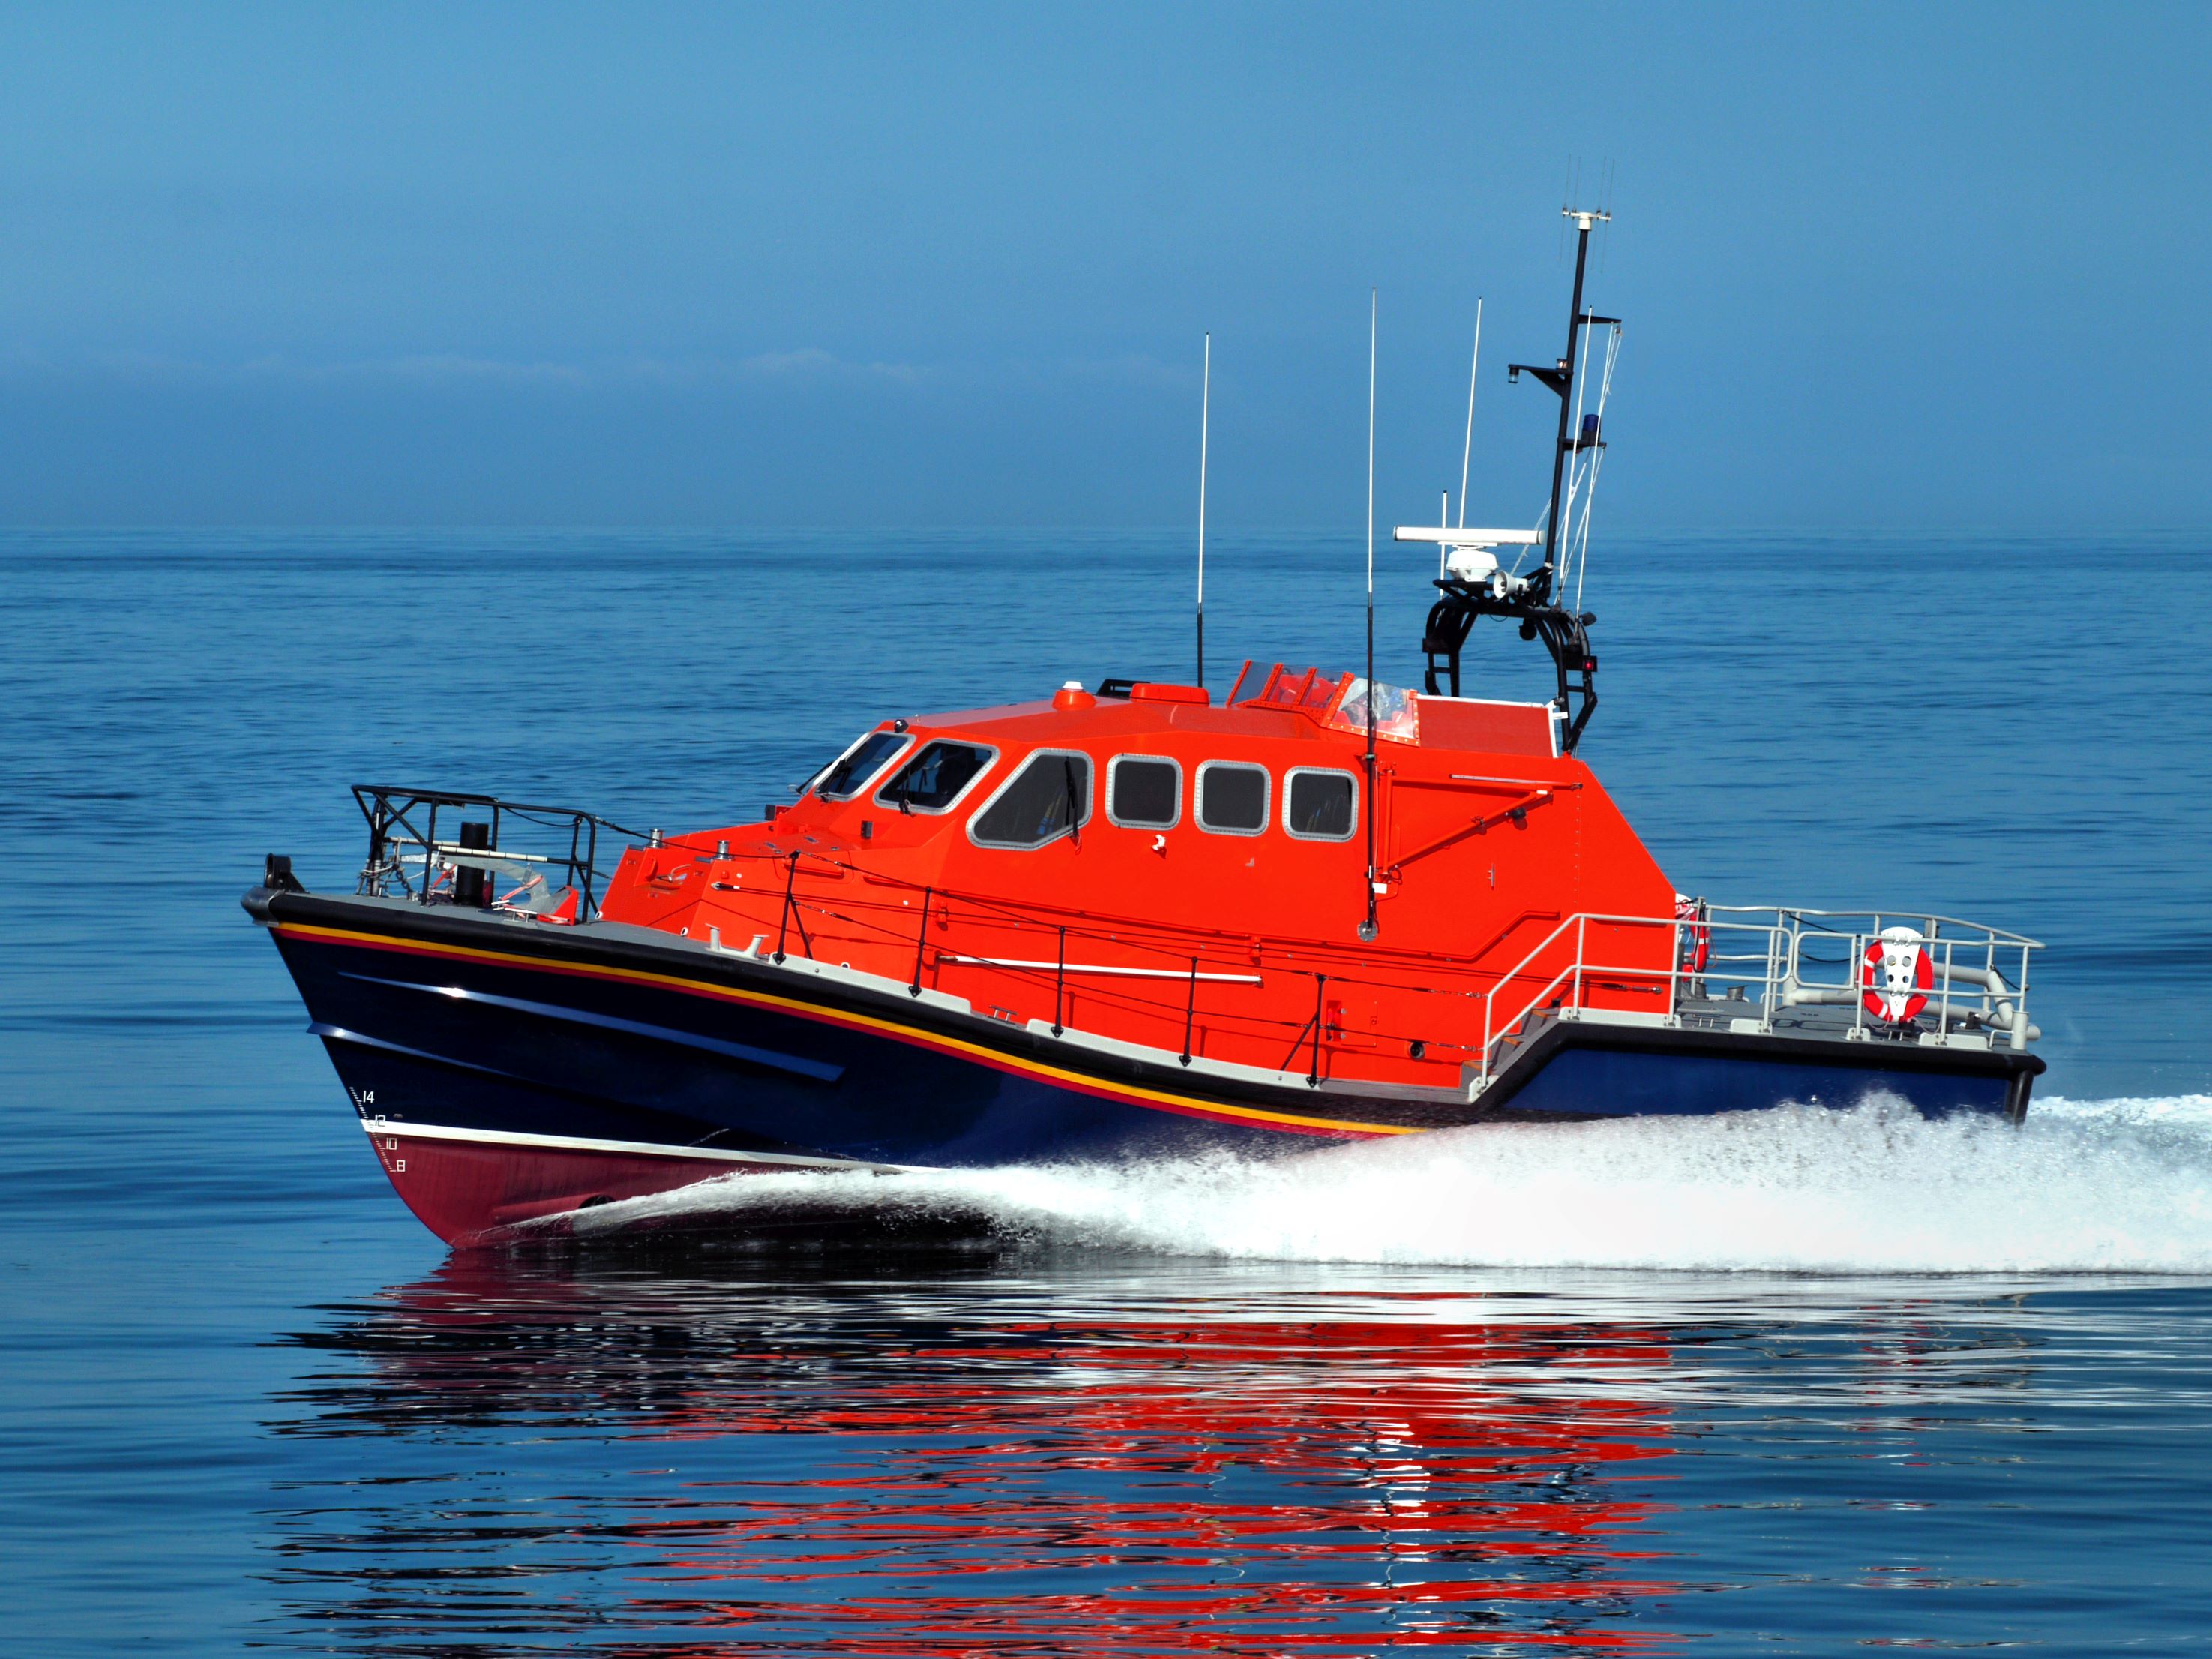 Search and rescue boat on the sea